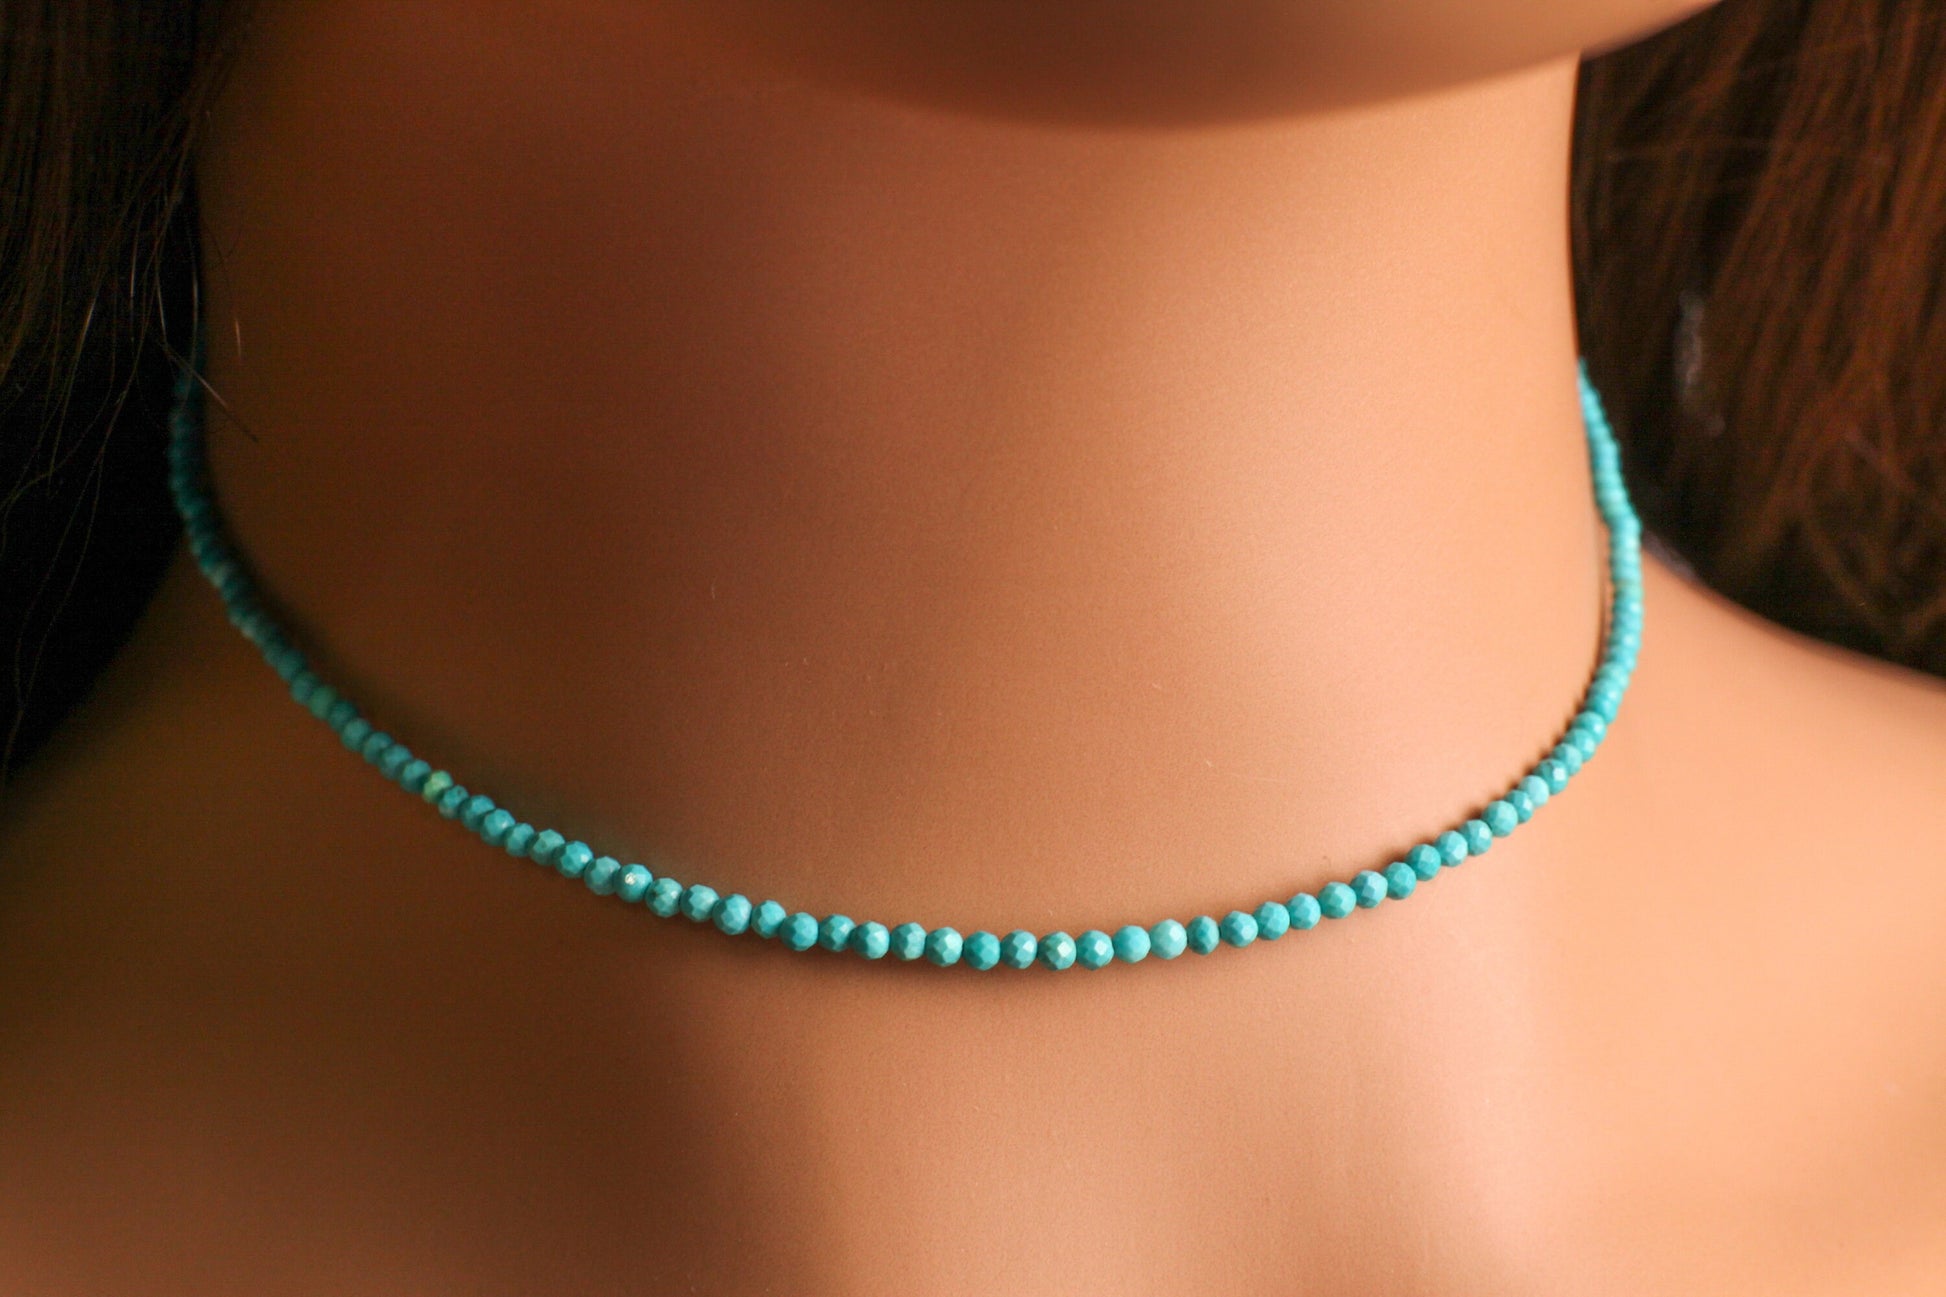 Natural Blue Turquoise Sleeping Beauty 2mm Faceted Round Silver Clasp Dainty Choker Layering Elegant Necklace, December Birthstone